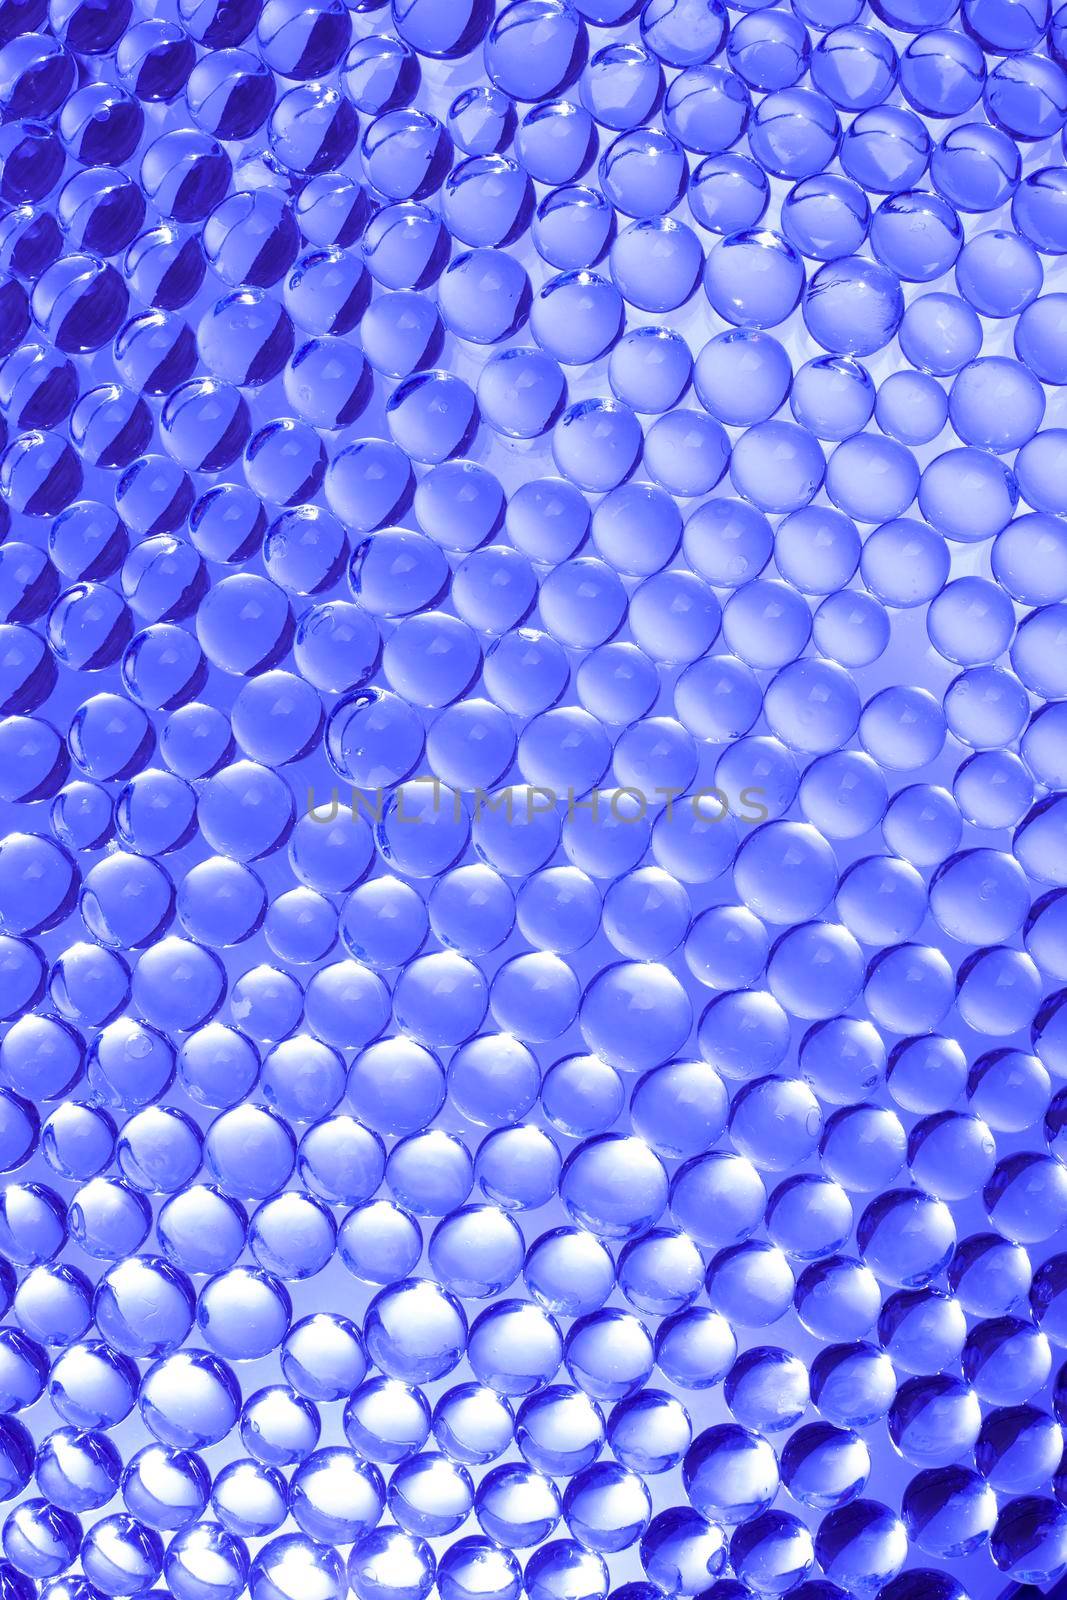 Background of glass beads in blue with highlights. Stock image.